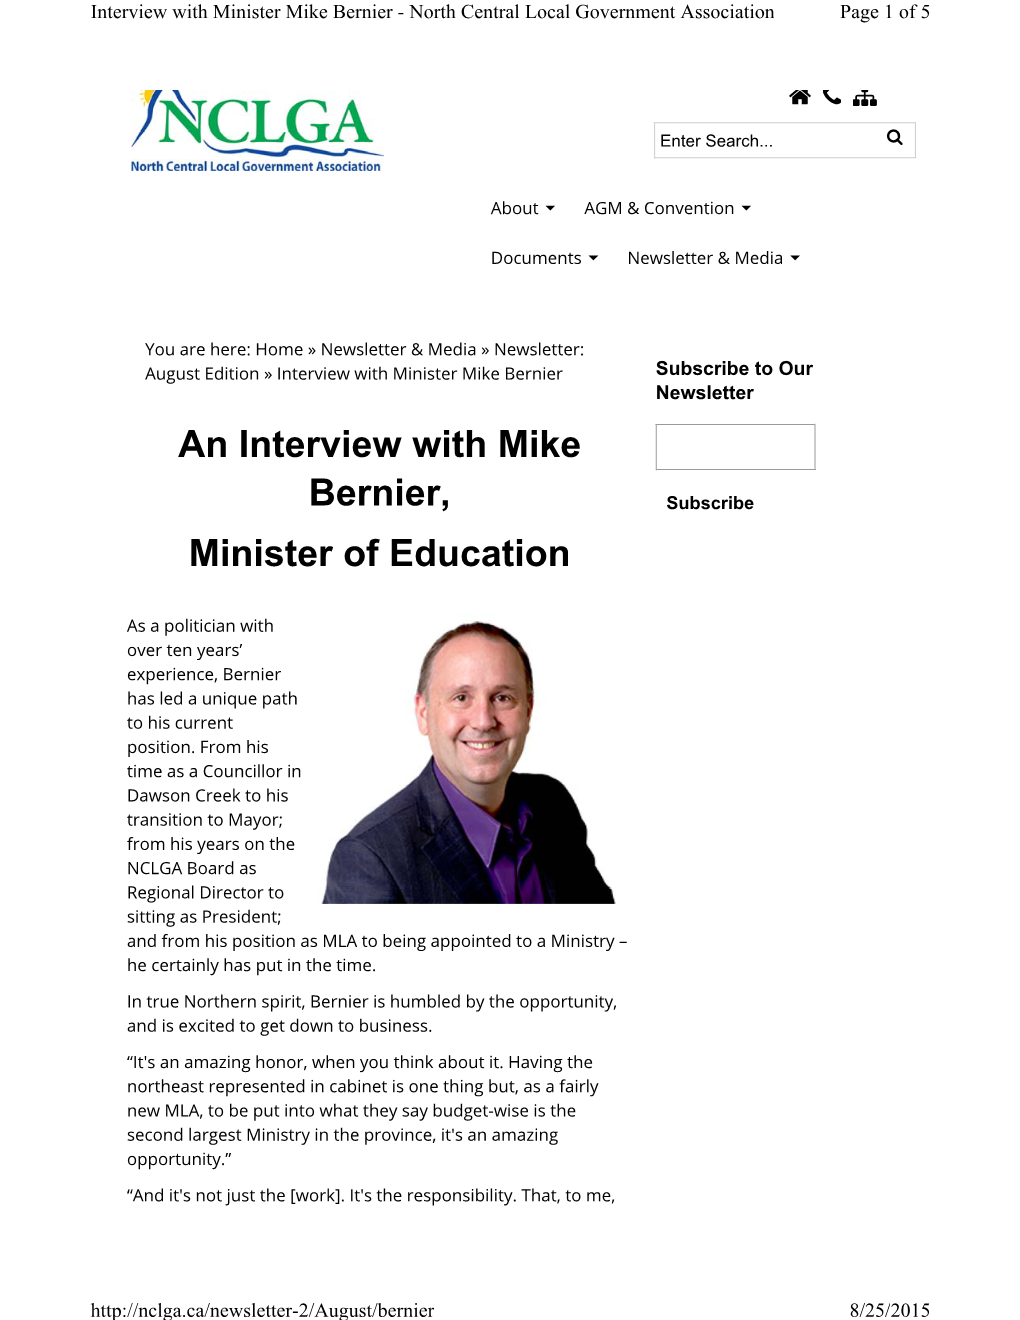 An Interview with Mike Bernier, Minister of Education